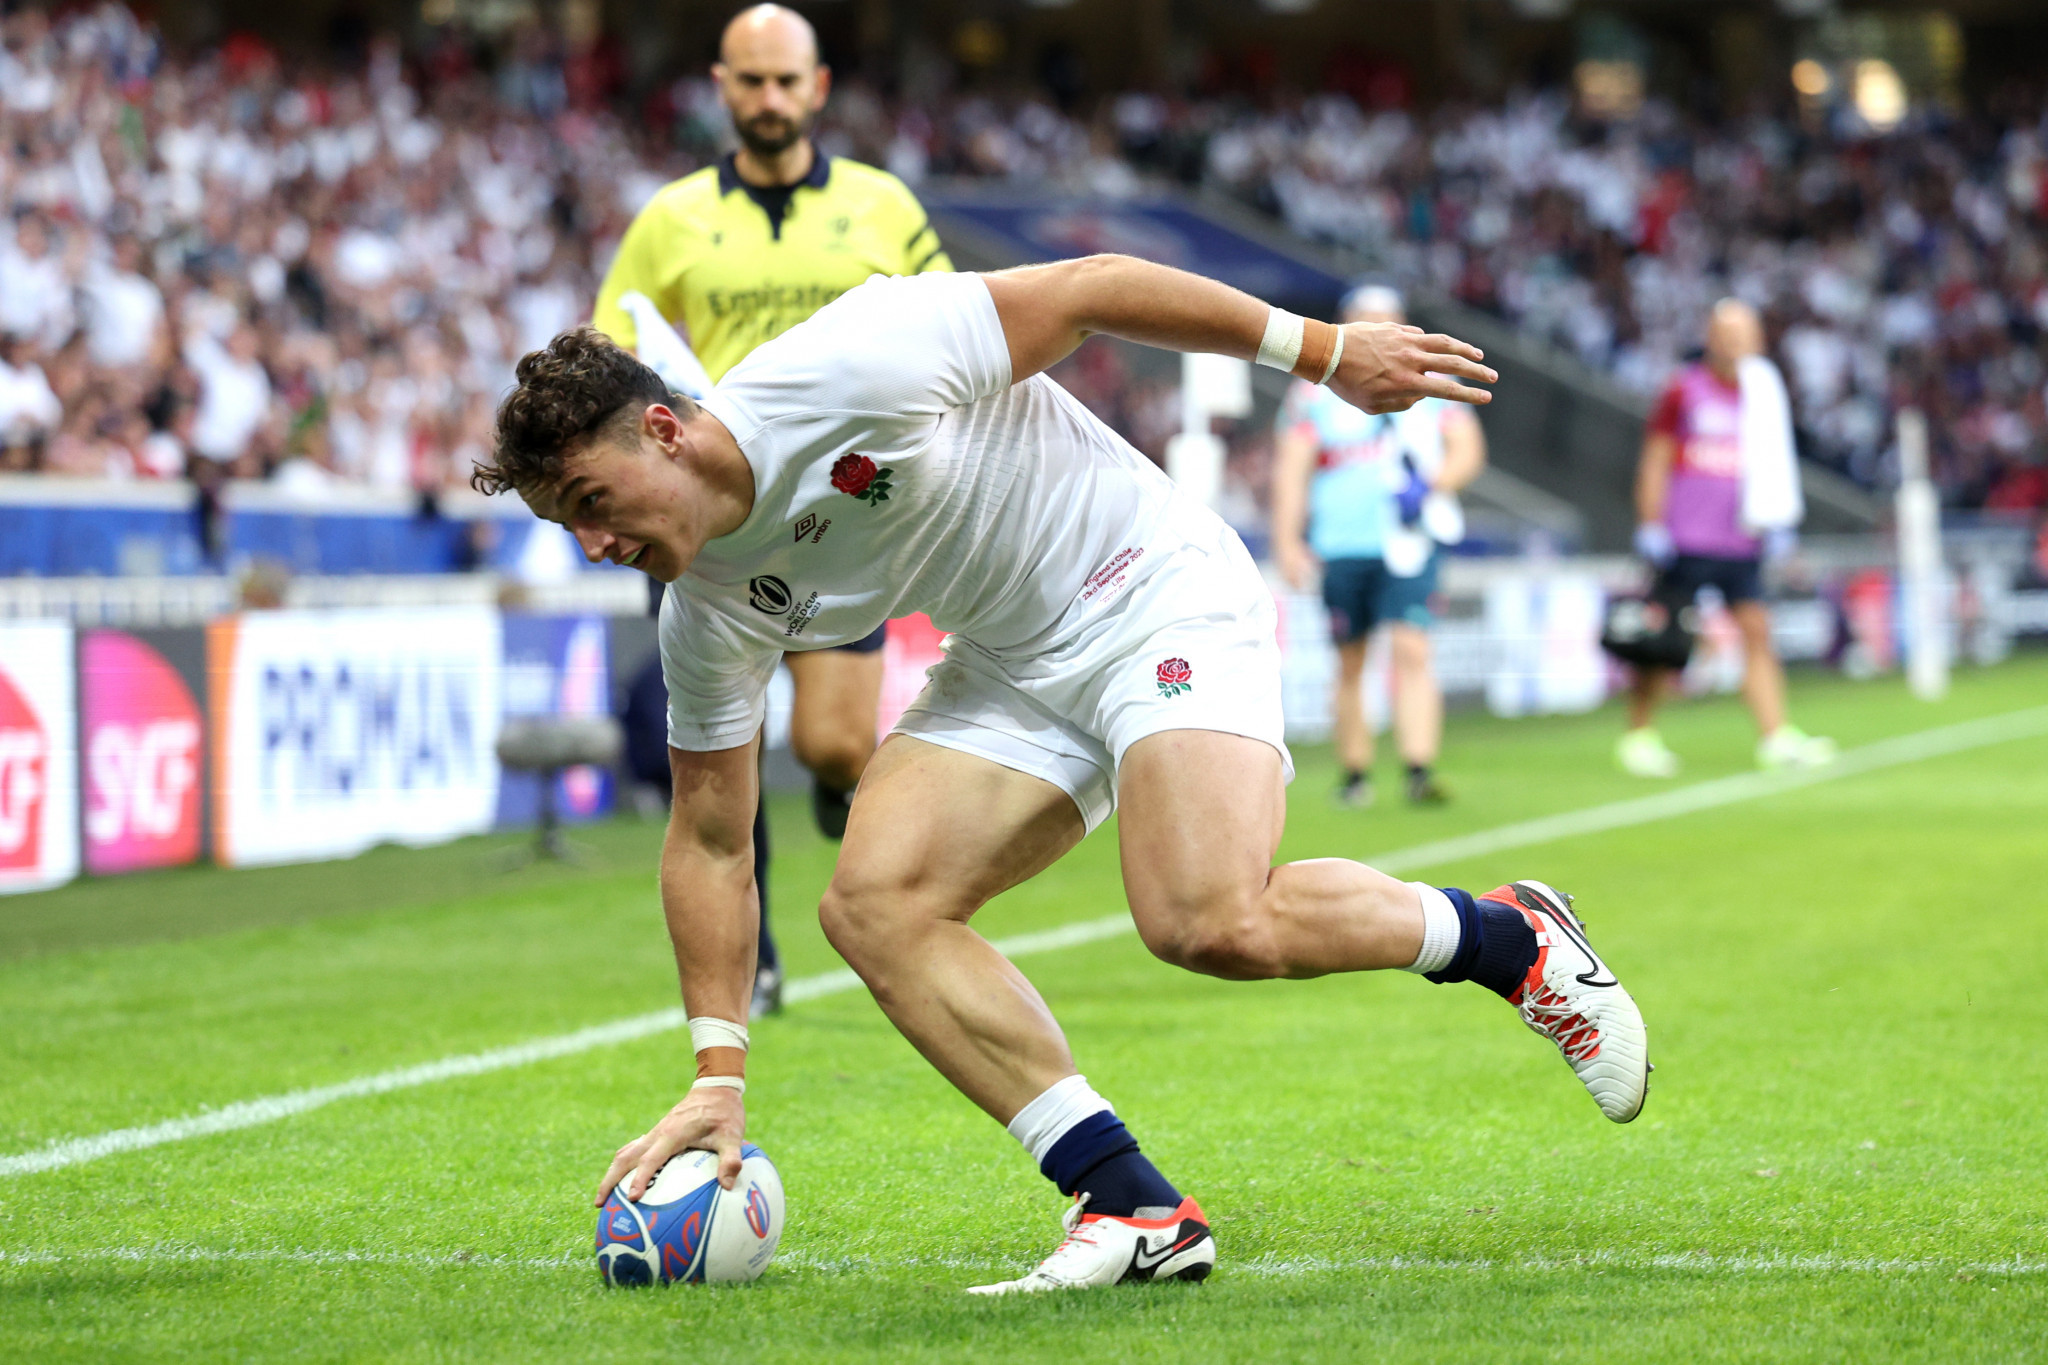 England's Rugby World Cup star Arundell expected to receive exemption to play Six Nations